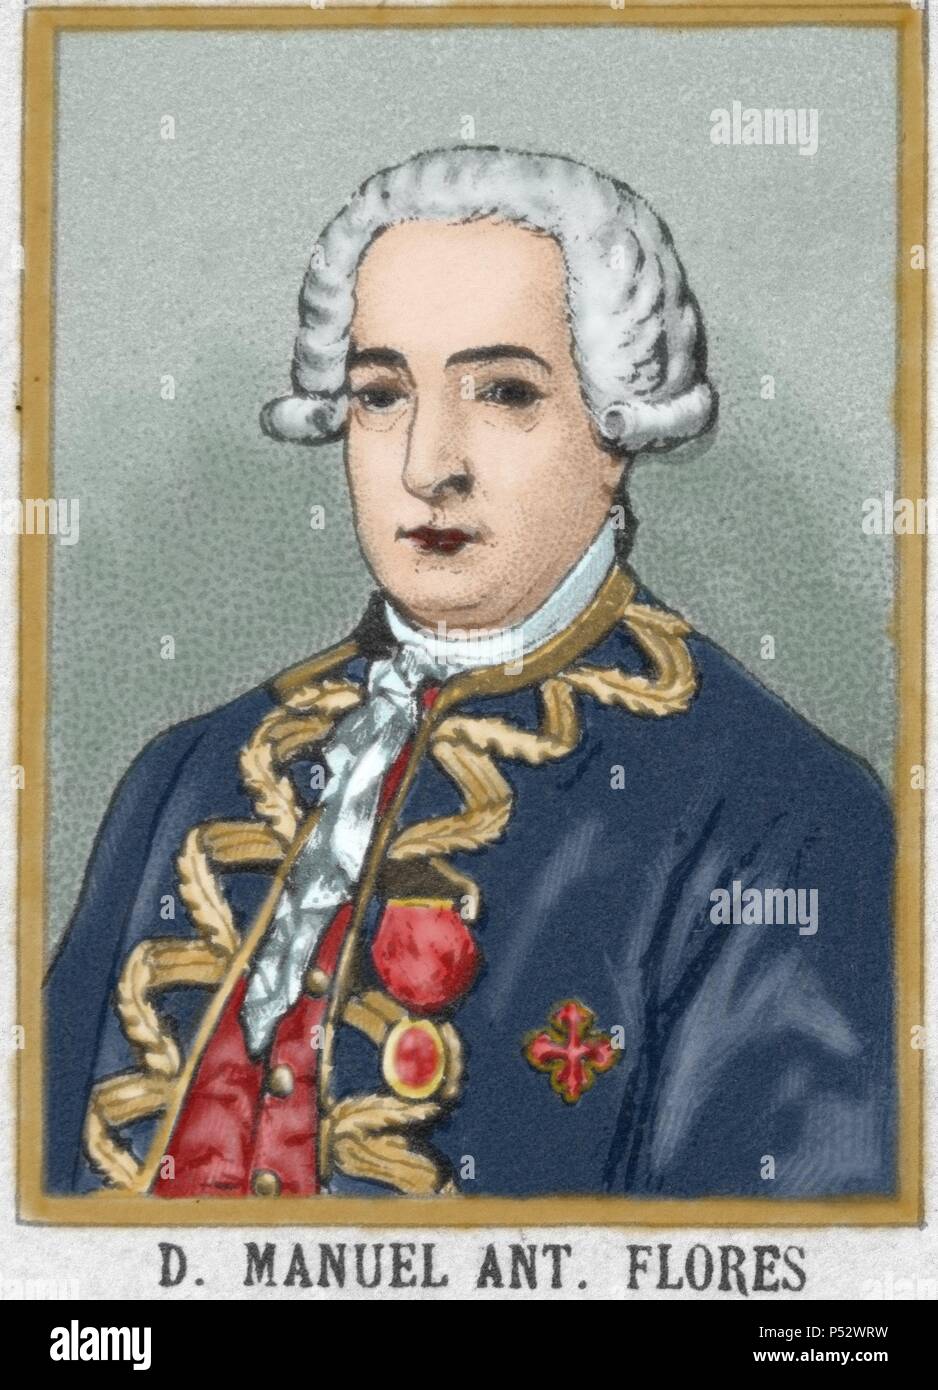 Manuel Antonio Flores (1722-1799). General in the Spanish navy and viceroy of New Granada (1776-1781) and New Spain (1787-1789). Colored engraving. Stock Photo